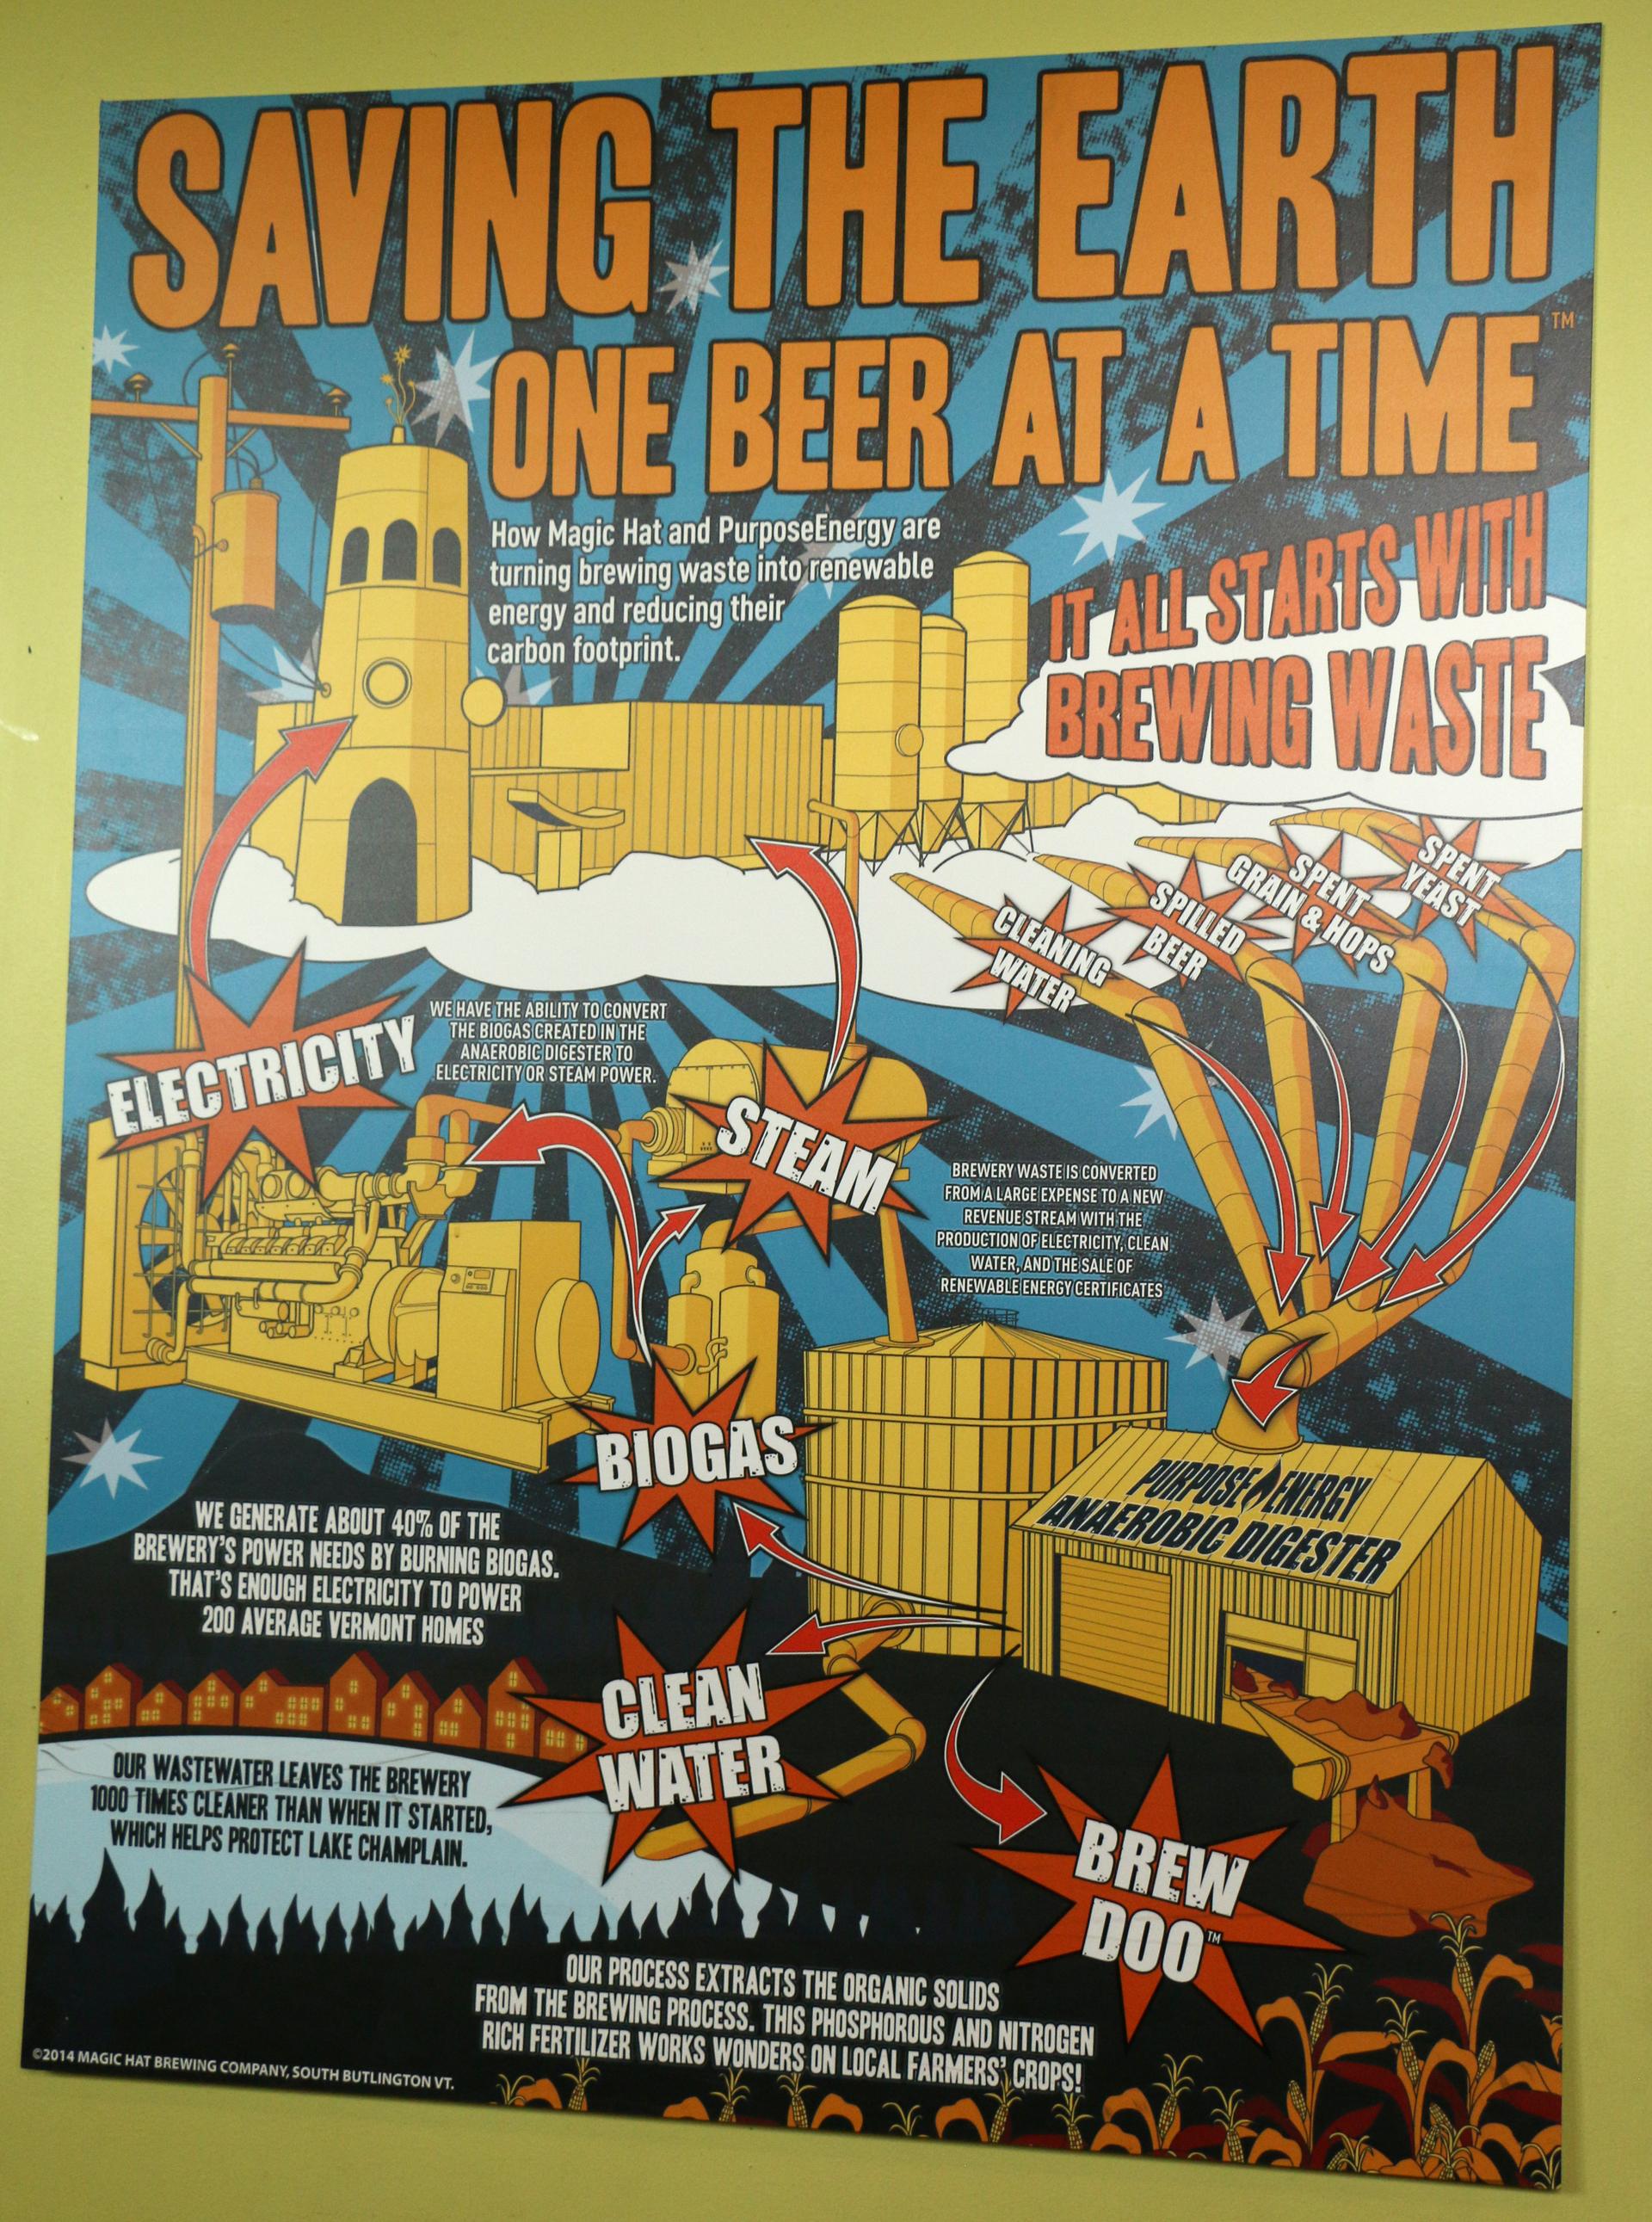 A poster at the Magic Hat brewery touts the environmental benefits of Purpose Energy's waster digester system.